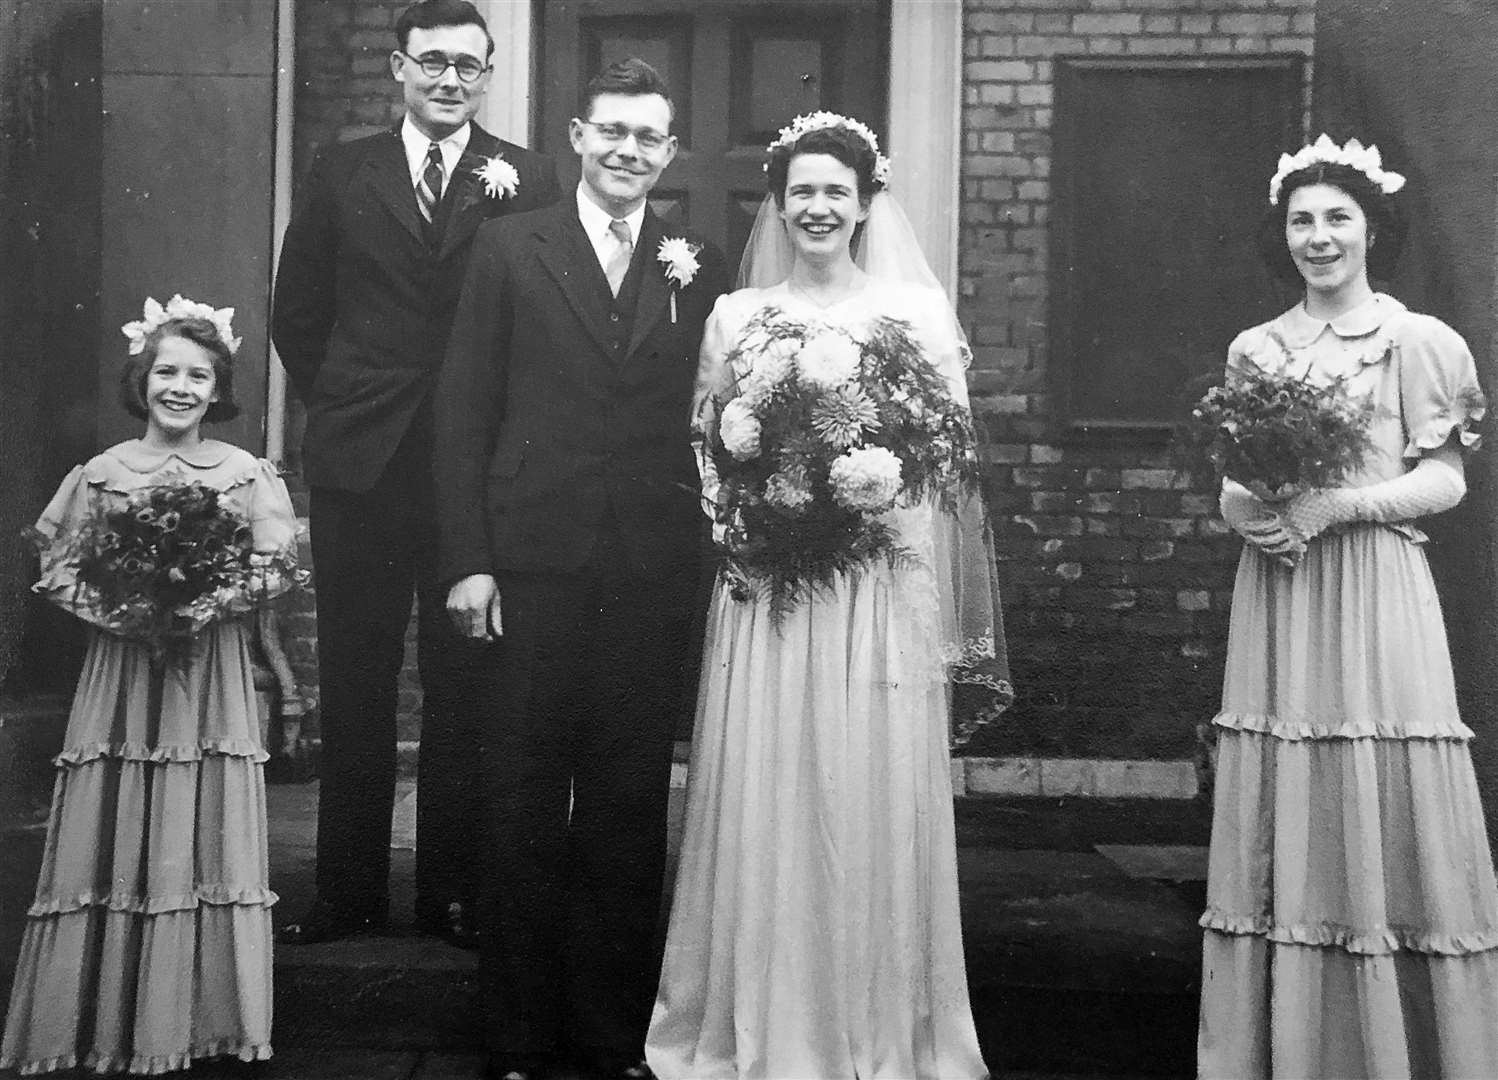 Georgina and Donald Williams' wedding at the Sheerness Dockyard Church, Blue Town, on Boxing Day 1950 with best man Donald's brother Leslie and bridesmaids, Glenys Jarvis, nine and Christine Hall, 17